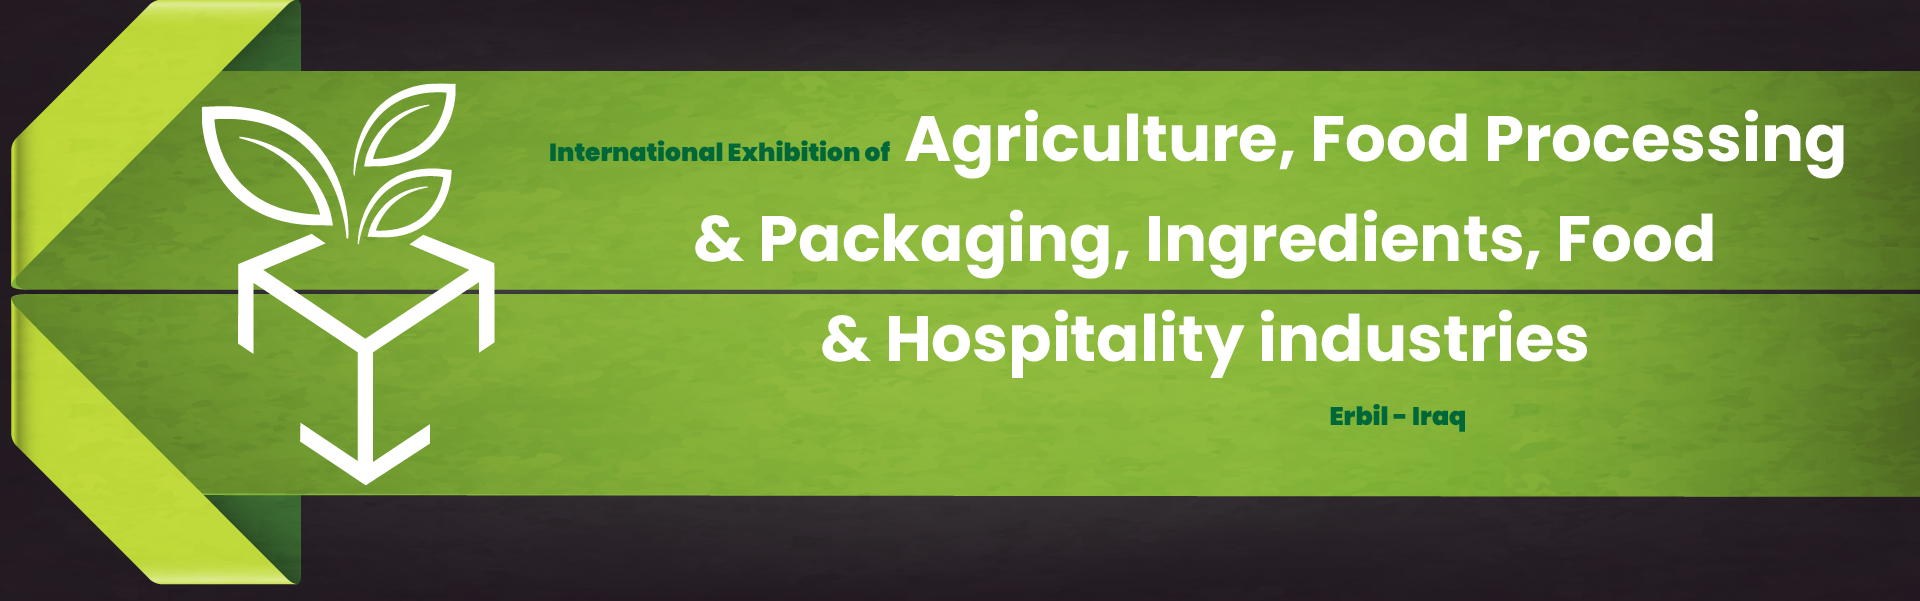 exhibition of agriculture food industry and packaging Erbil Iraq